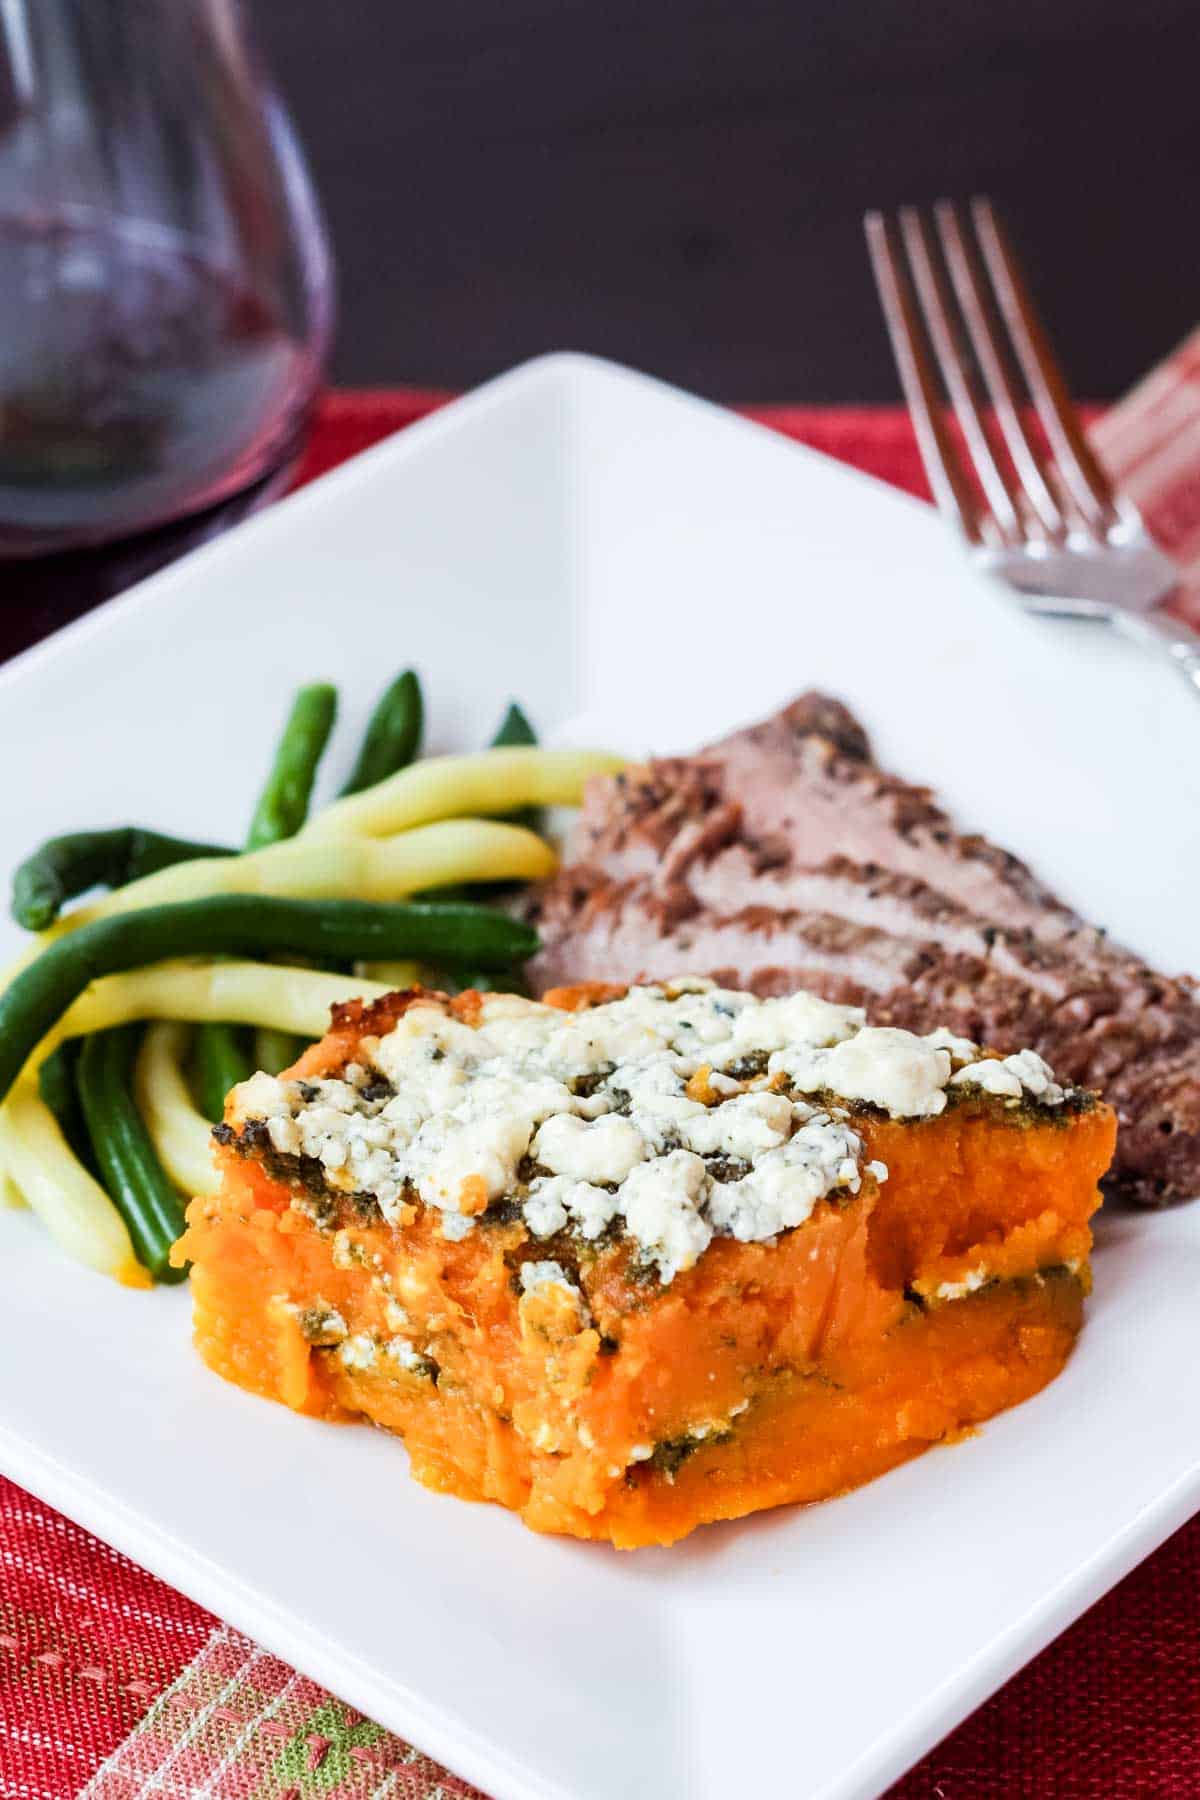 A scoop of Butternut Squash Gratin on a plate with steak and string beans.